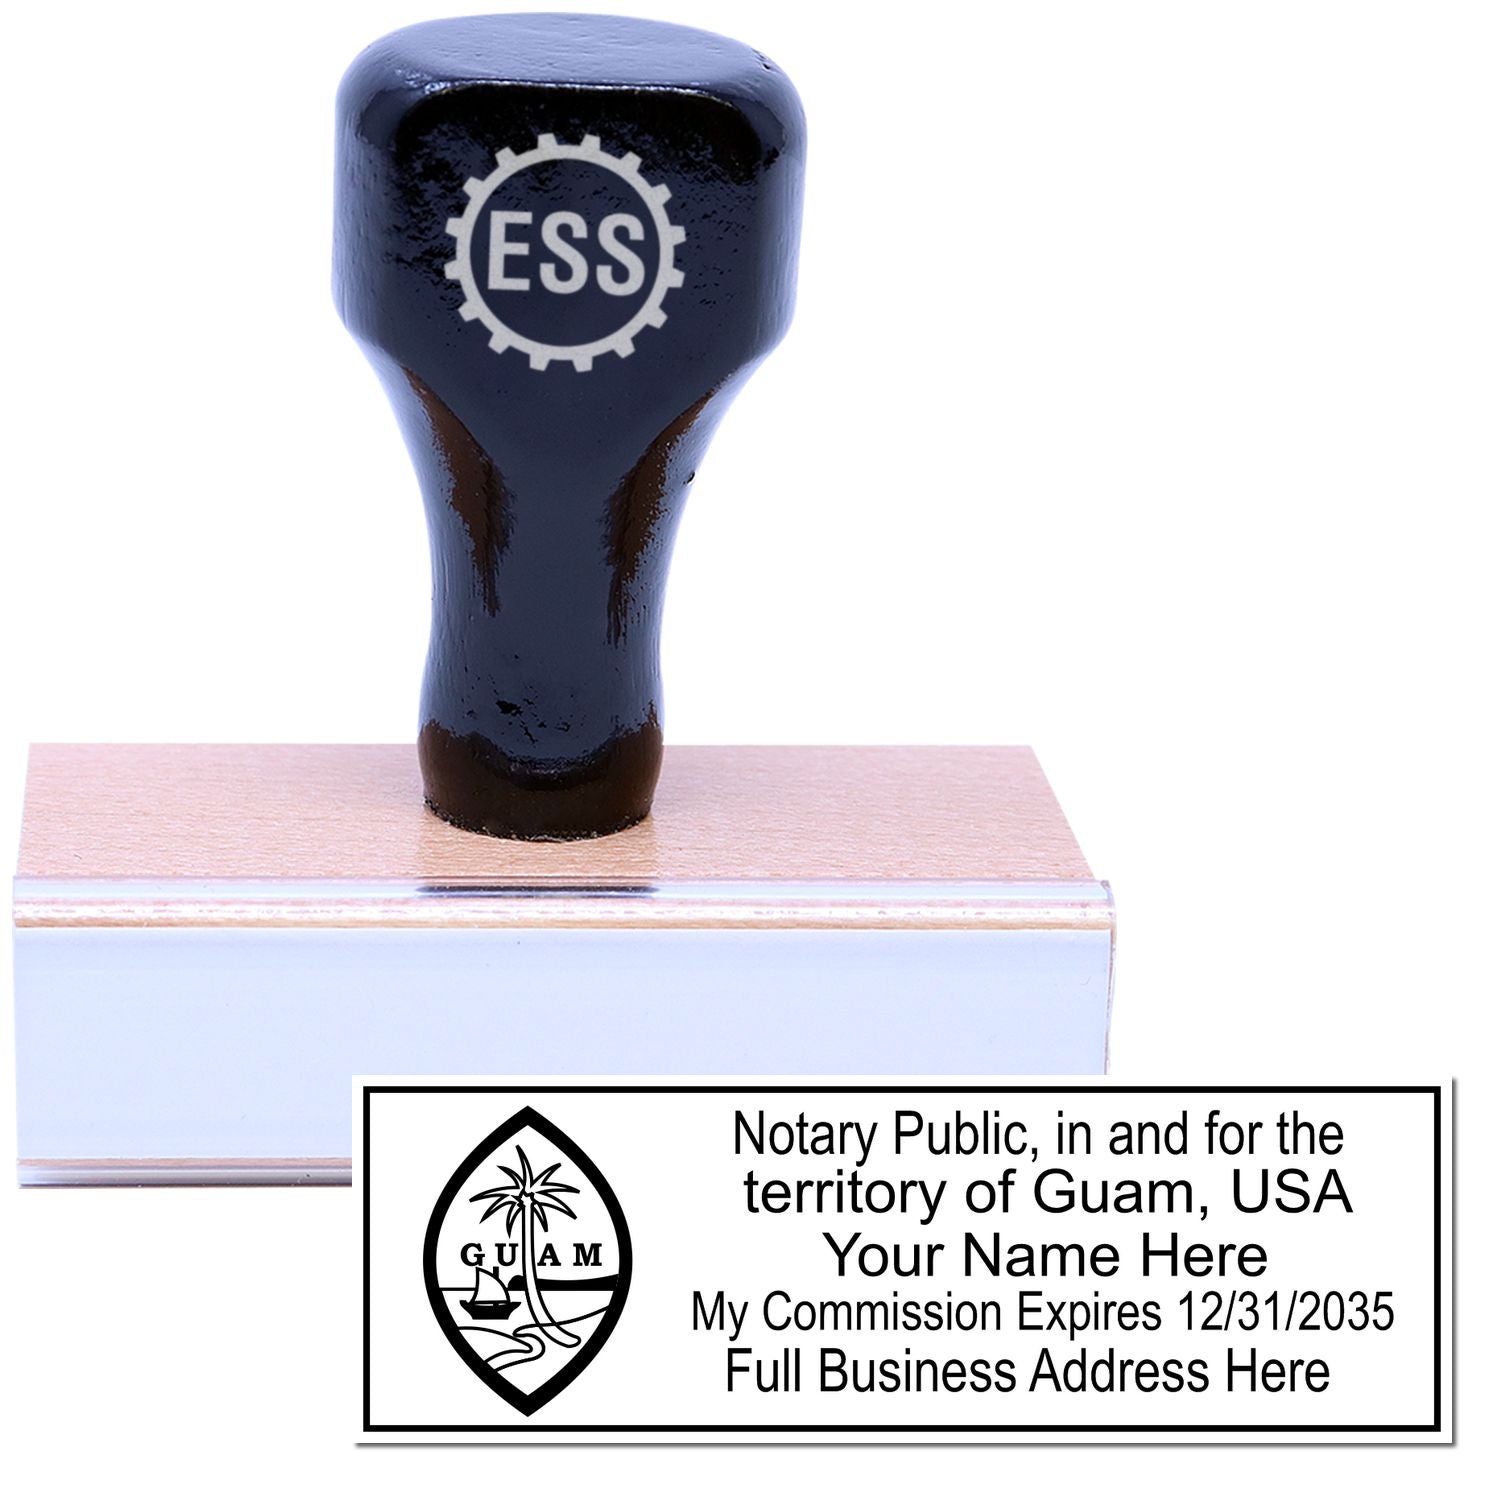 The main image for the Wooden Handle Guam Rectangular Notary Public Stamp depicting a sample of the imprint and electronic files